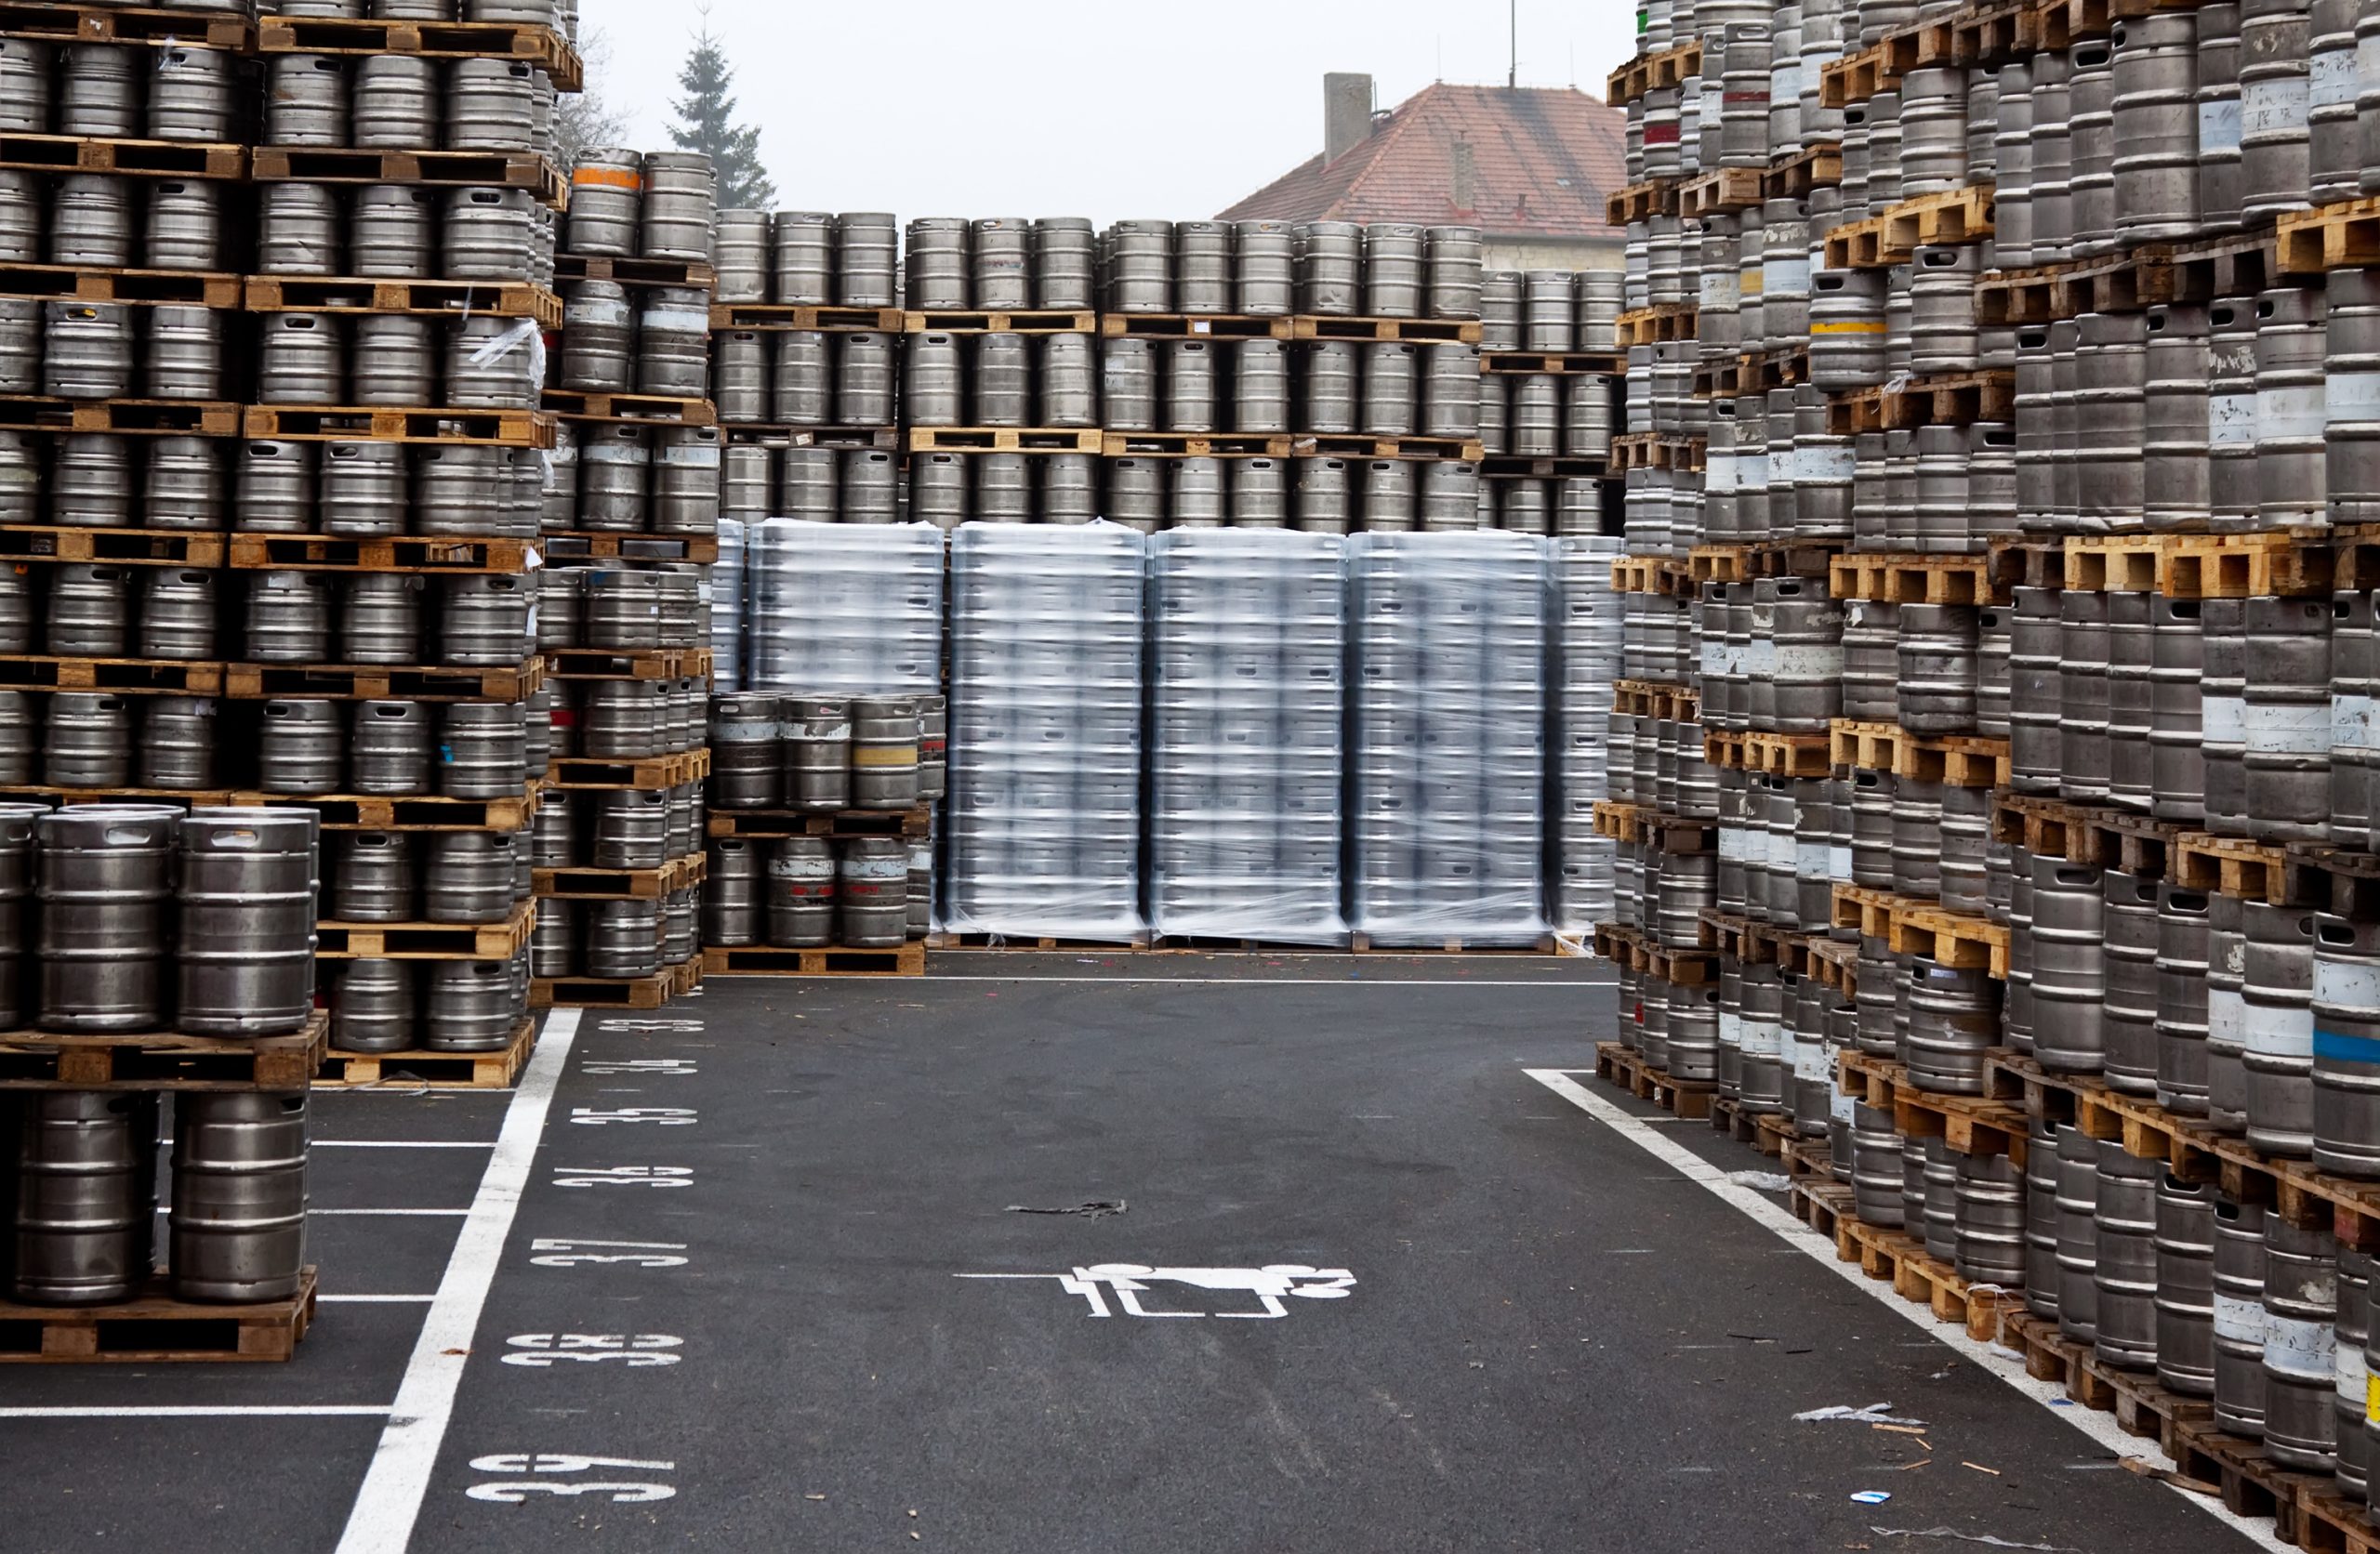 Beer kegs stored in rows with pallets.